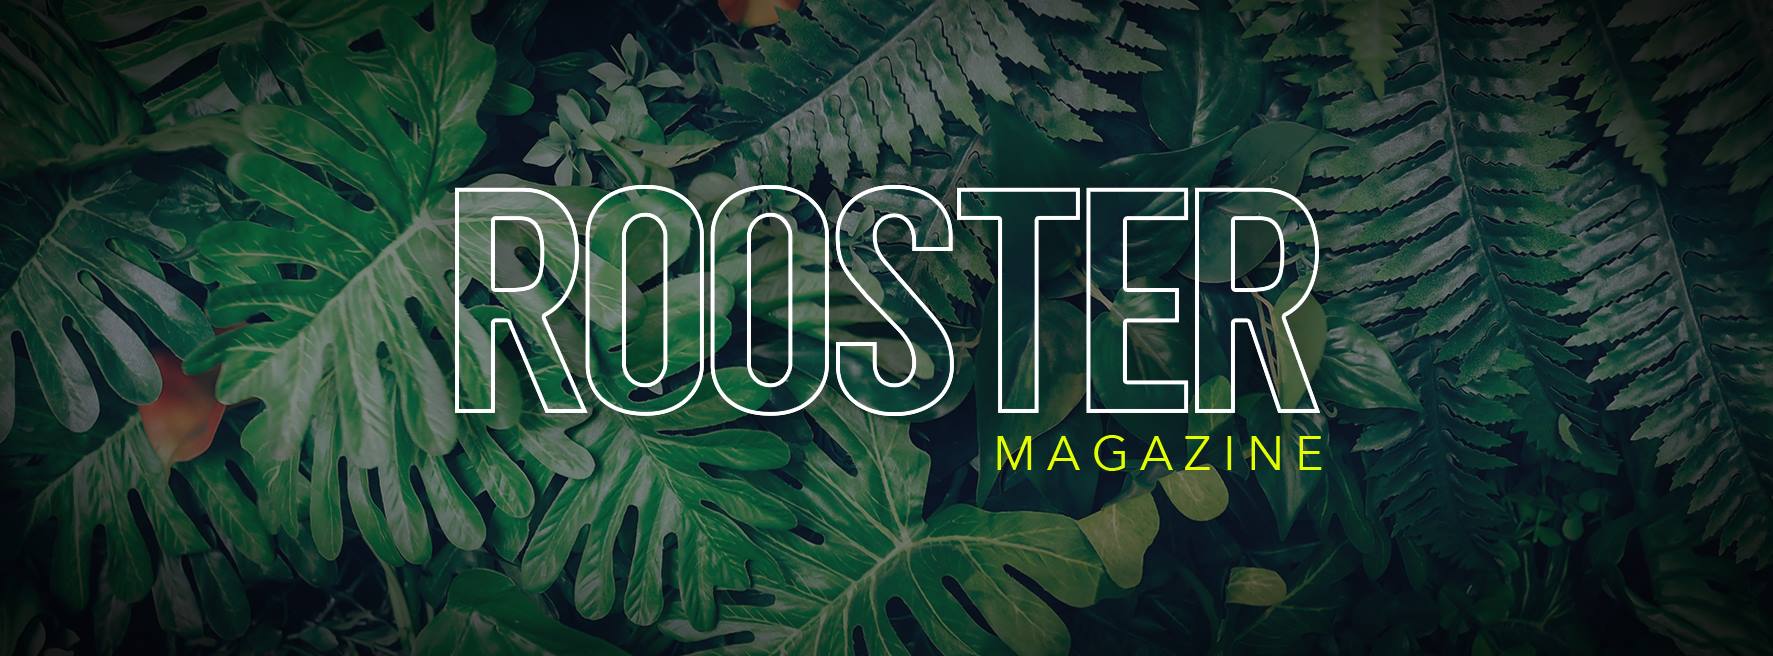 Rooster Magazine